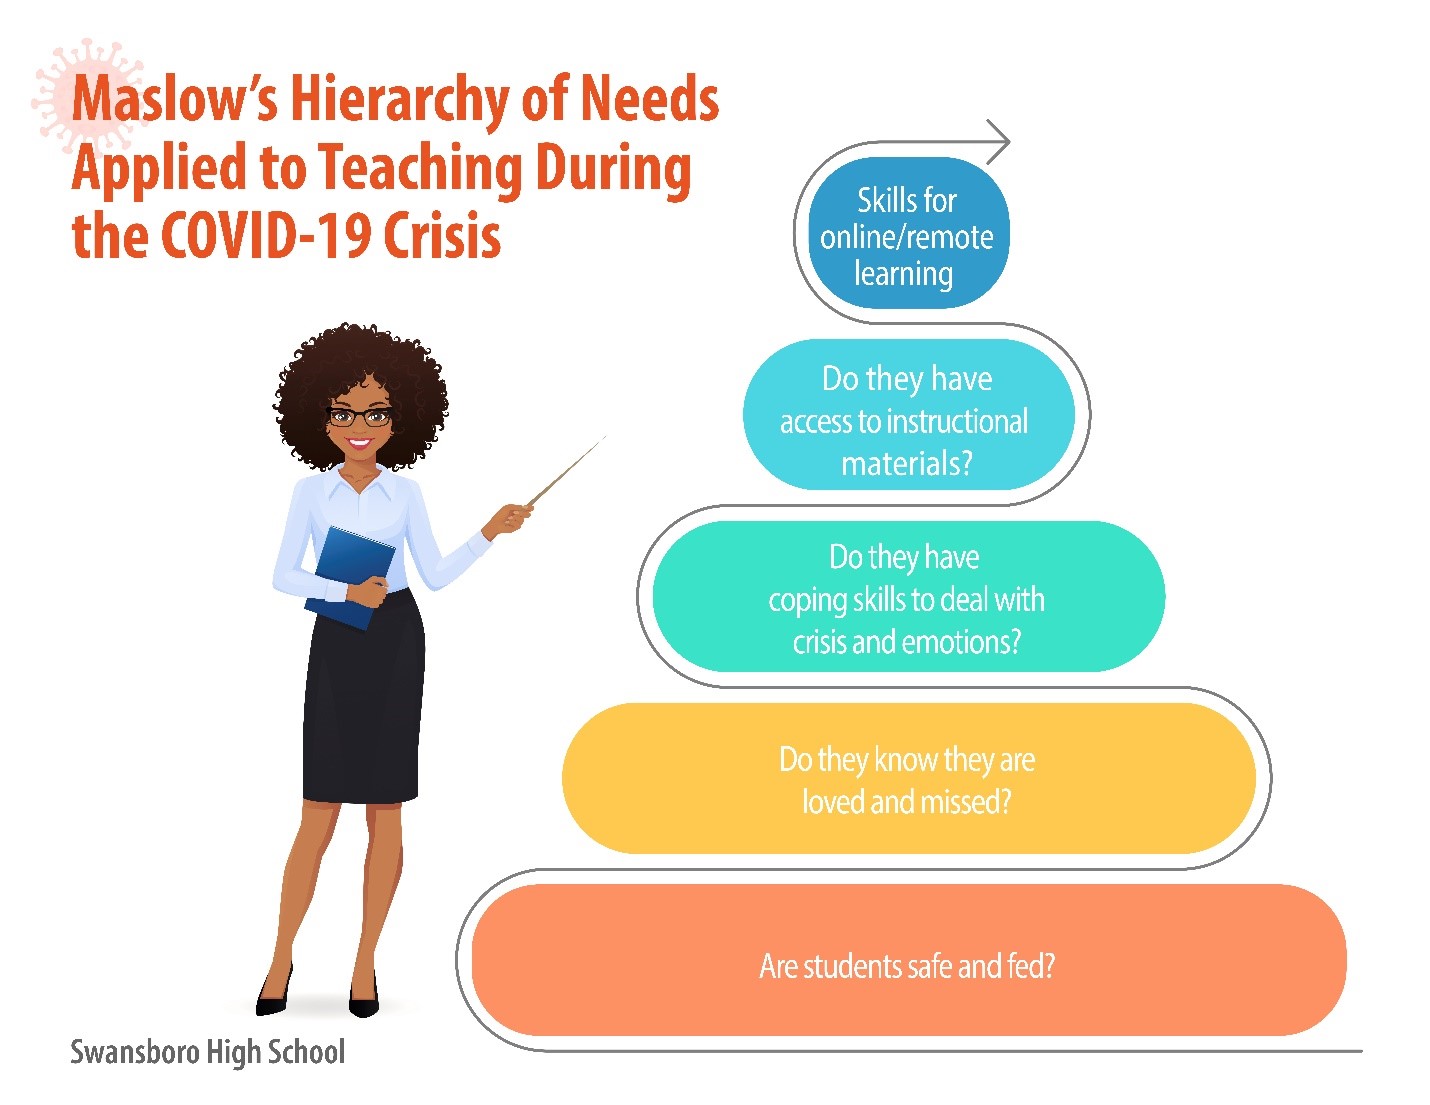 Maslow’s Hierarchy of Needs and the Covid-19 Crisis